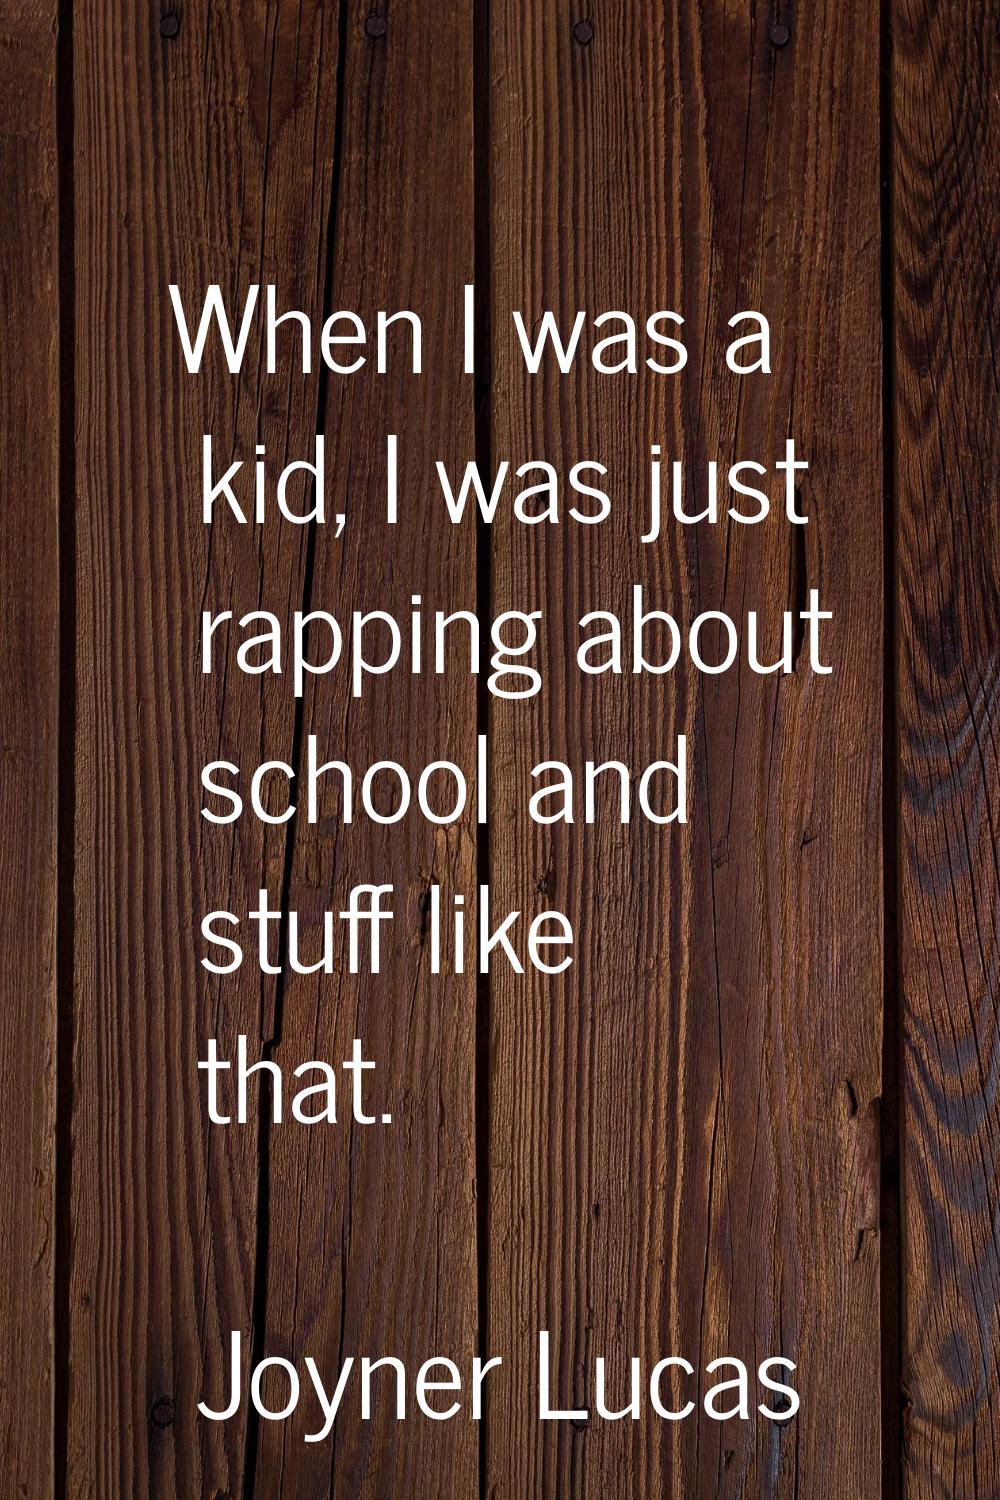 When I was a kid, I was just rapping about school and stuff like that.